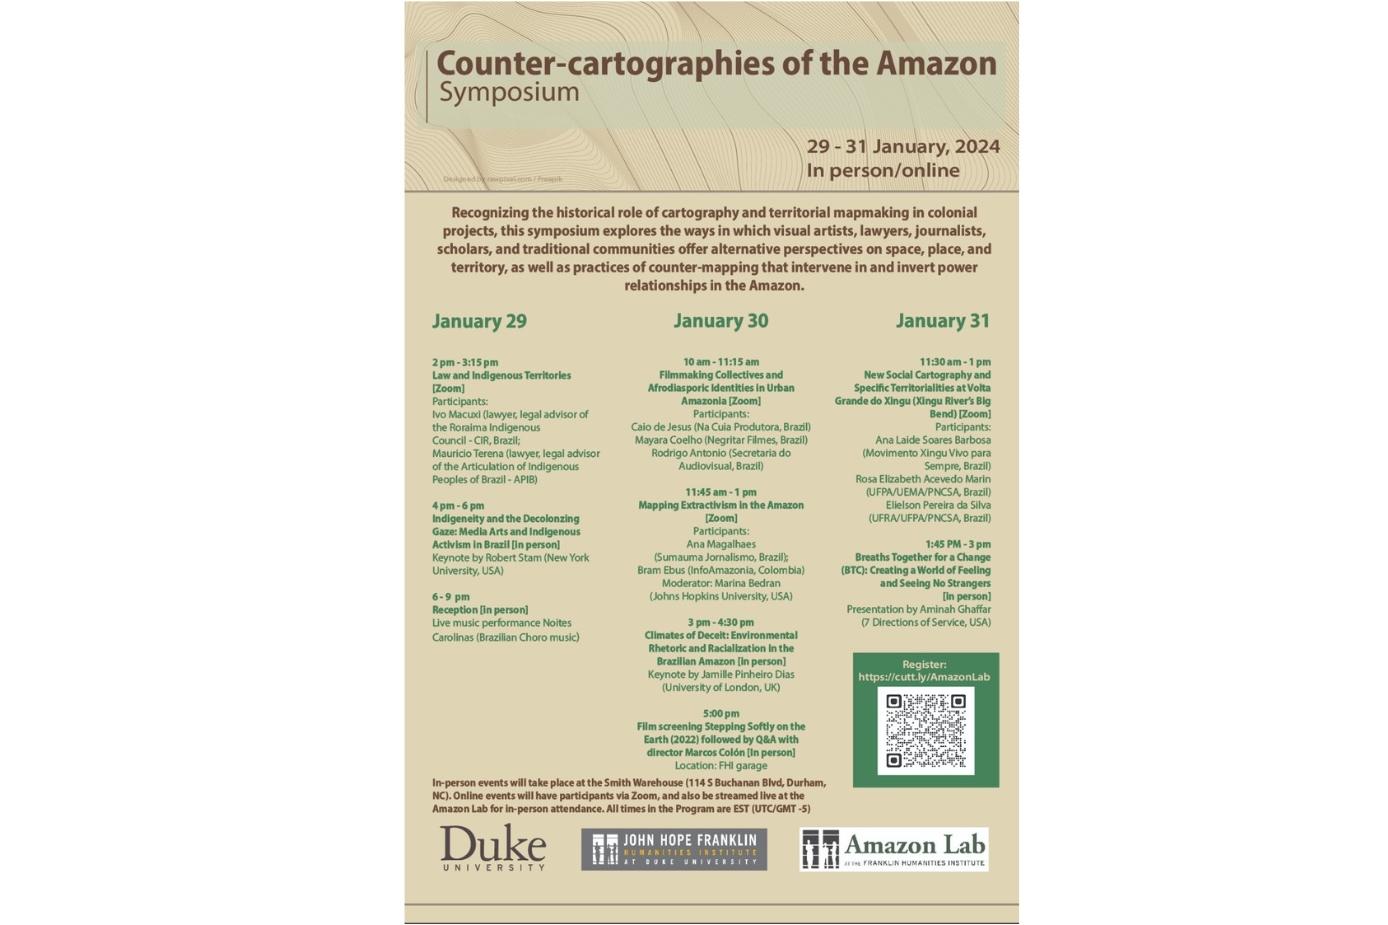 Mostly yellow and green flyer announcing Counter-cartographies of the Amazon Symposium